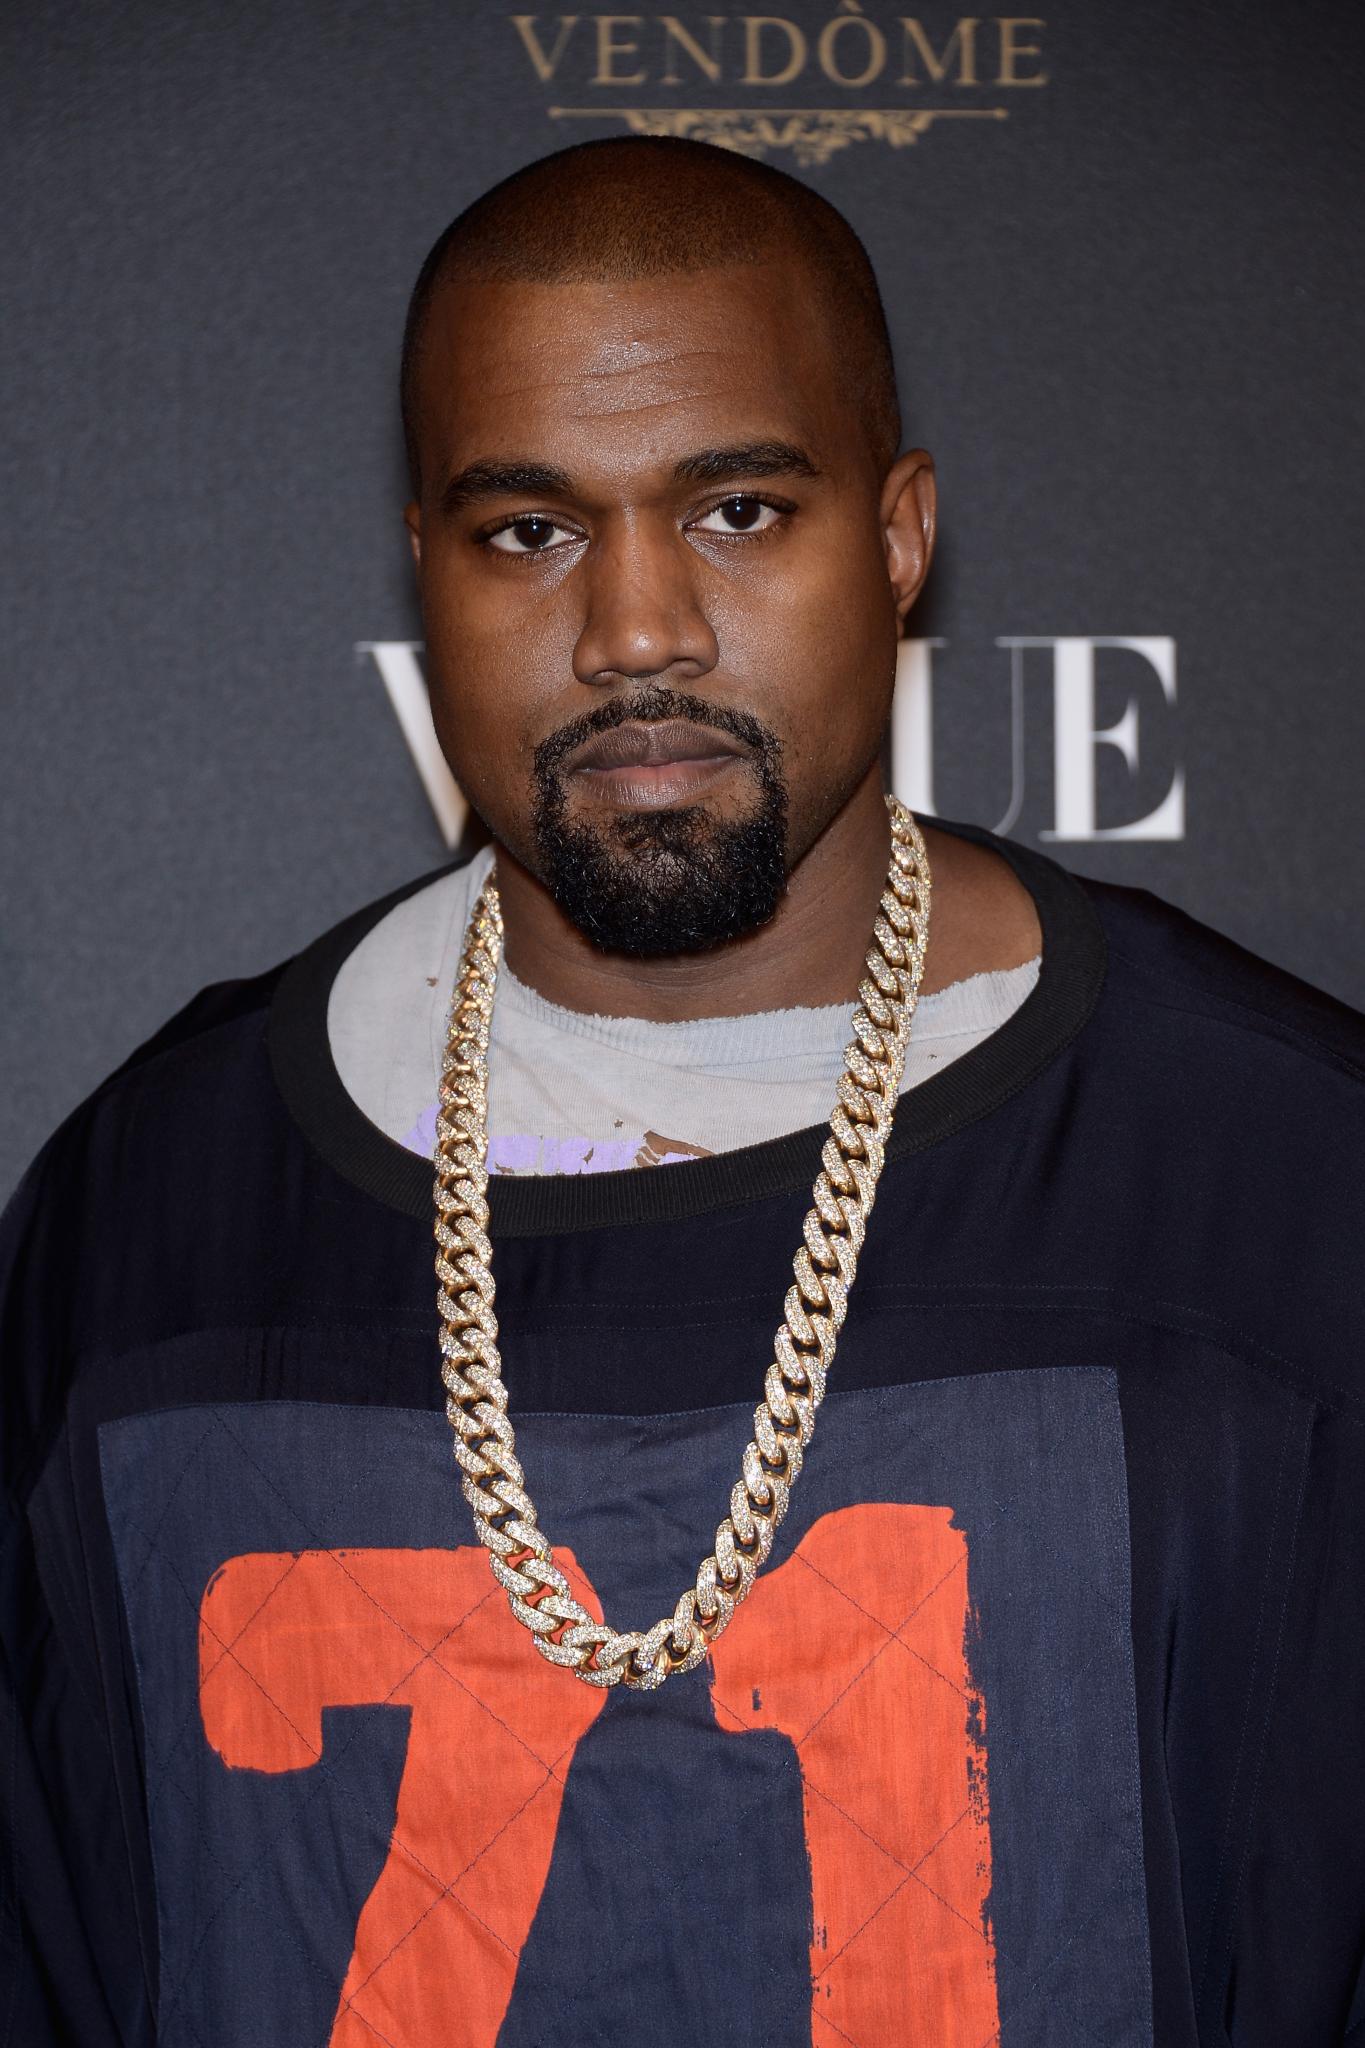 Kanye West Releases New Footwear, Introducing the 'Crepe Sole Boots'
